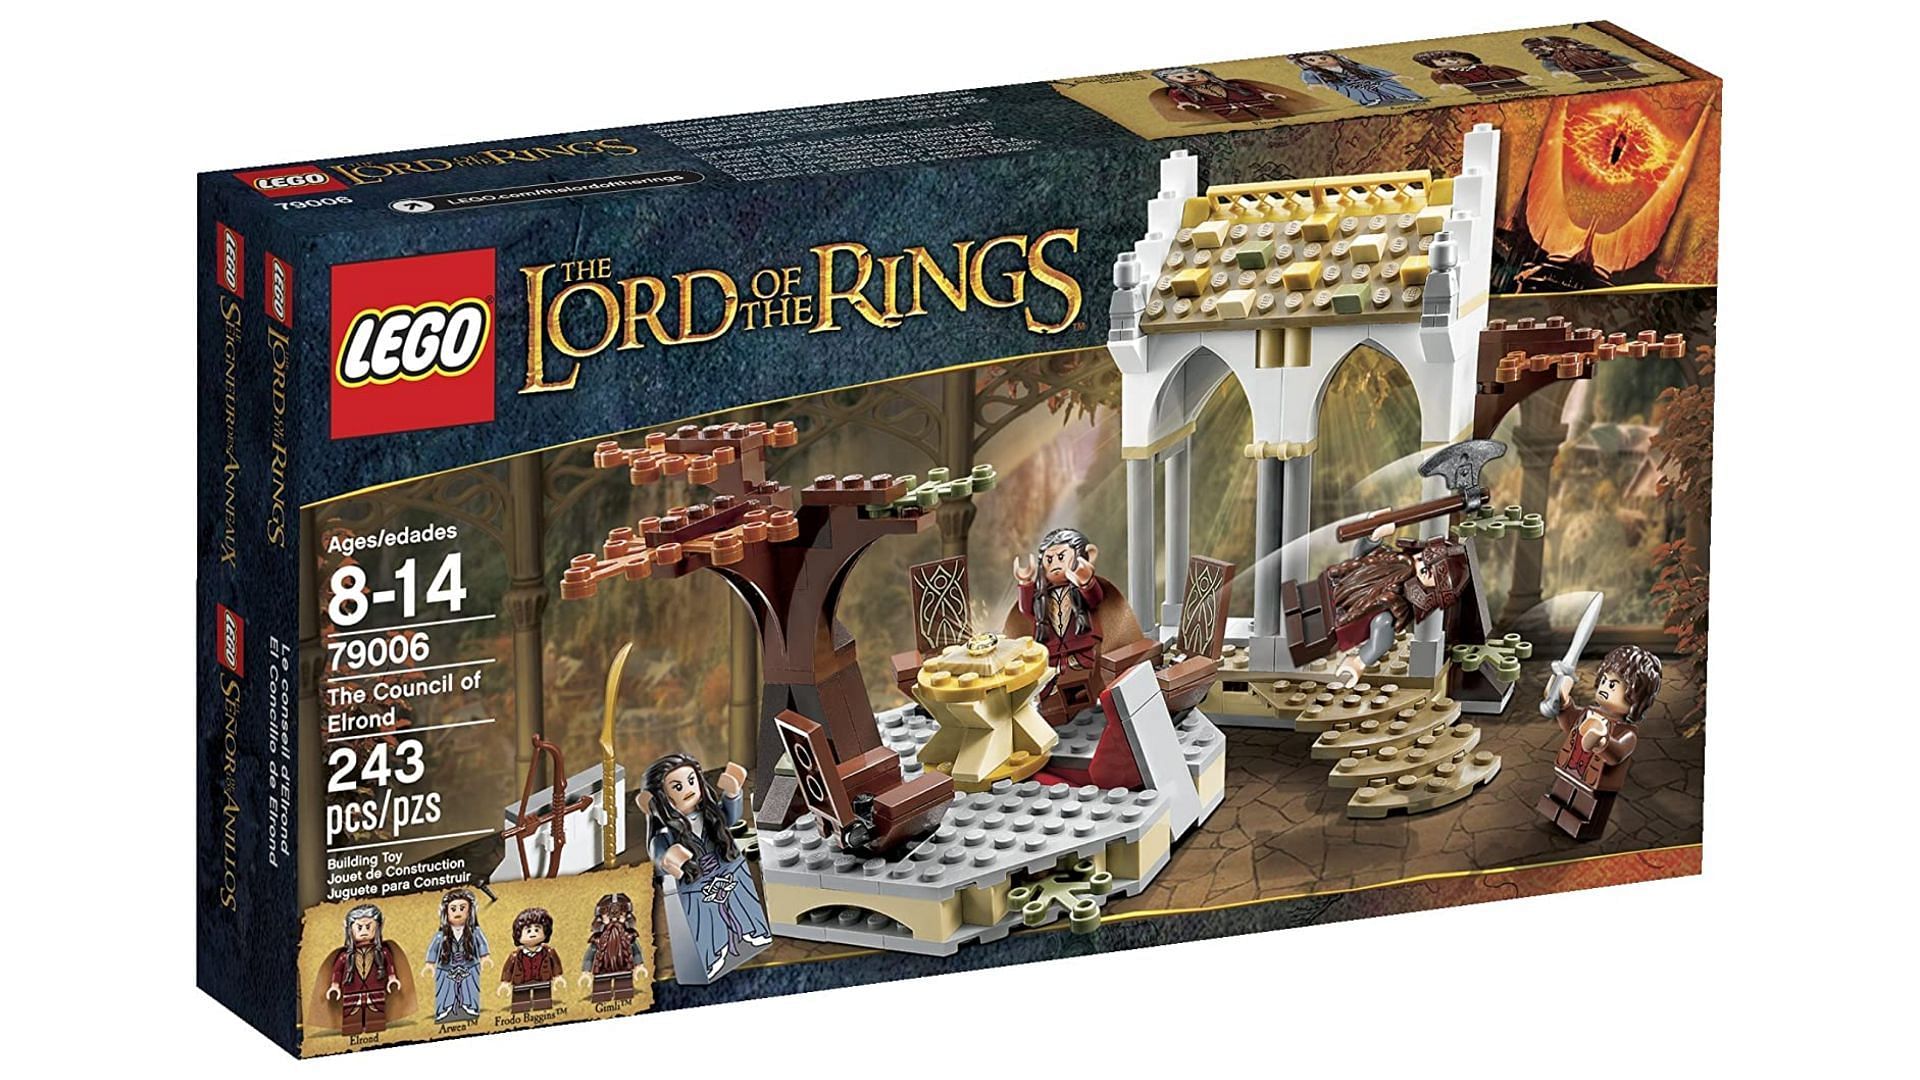 A representative image of The Lord of the Rings Rivendell set (Image via Lego)